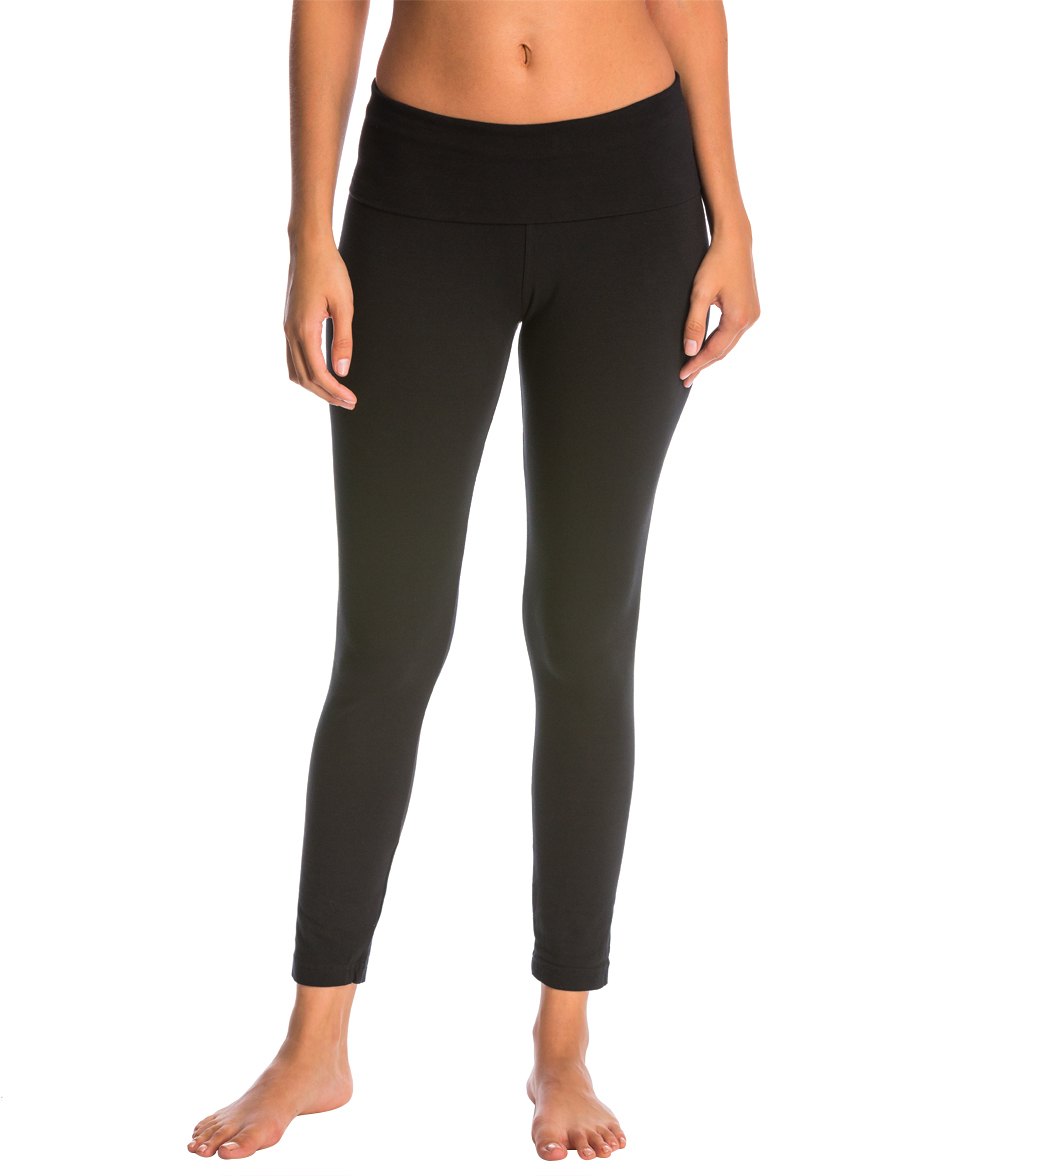 Buy HEGALY Women's Flare Yoga Pants - Crossover Flare Leggings High Waisted  Bootcut Bell Bottom Workout Sweatpants Black at Amazon.in